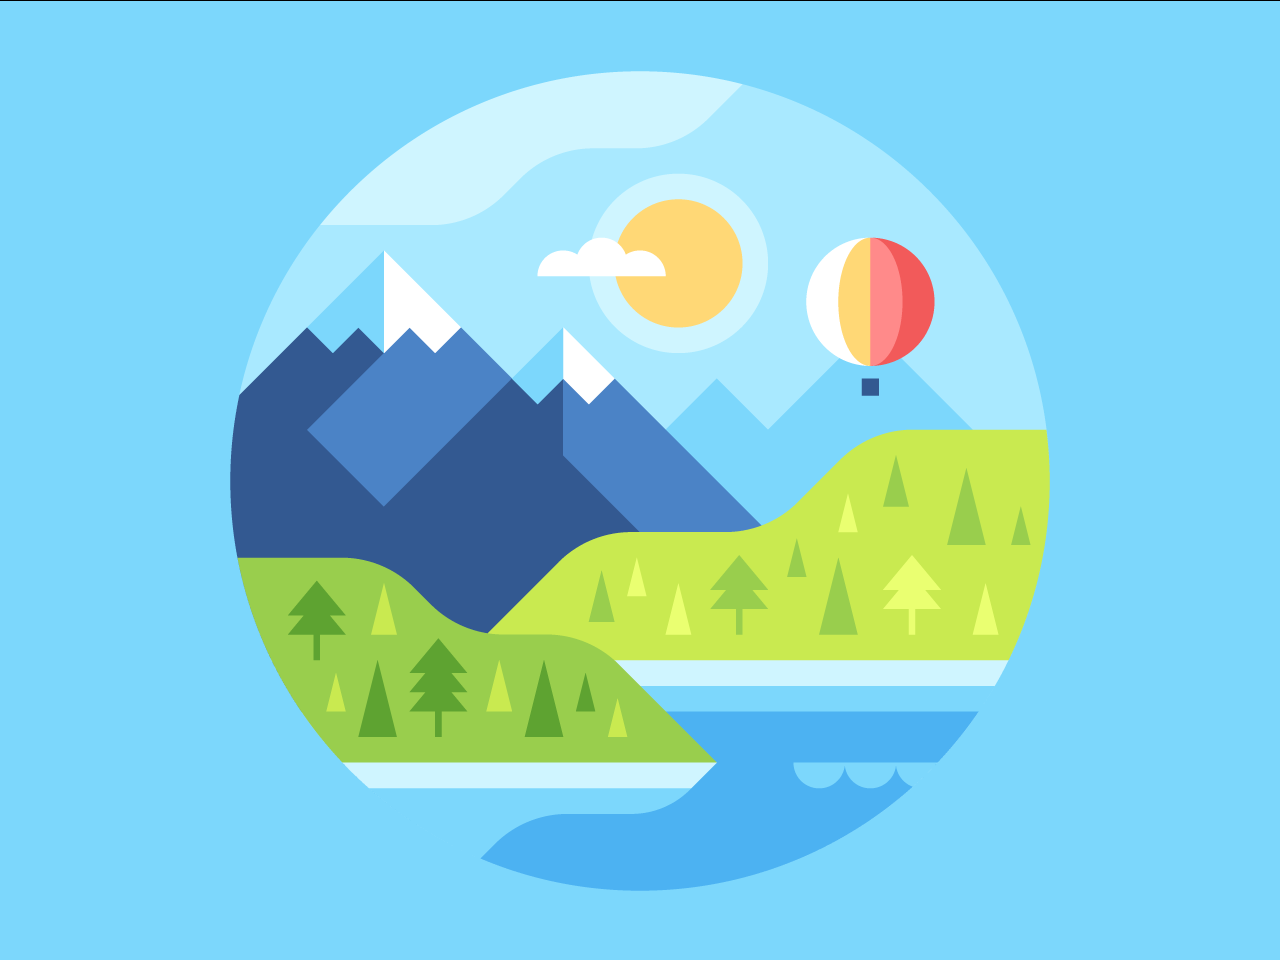 Mountain watch face backgrounds and illustrations by Alex Pasquarella